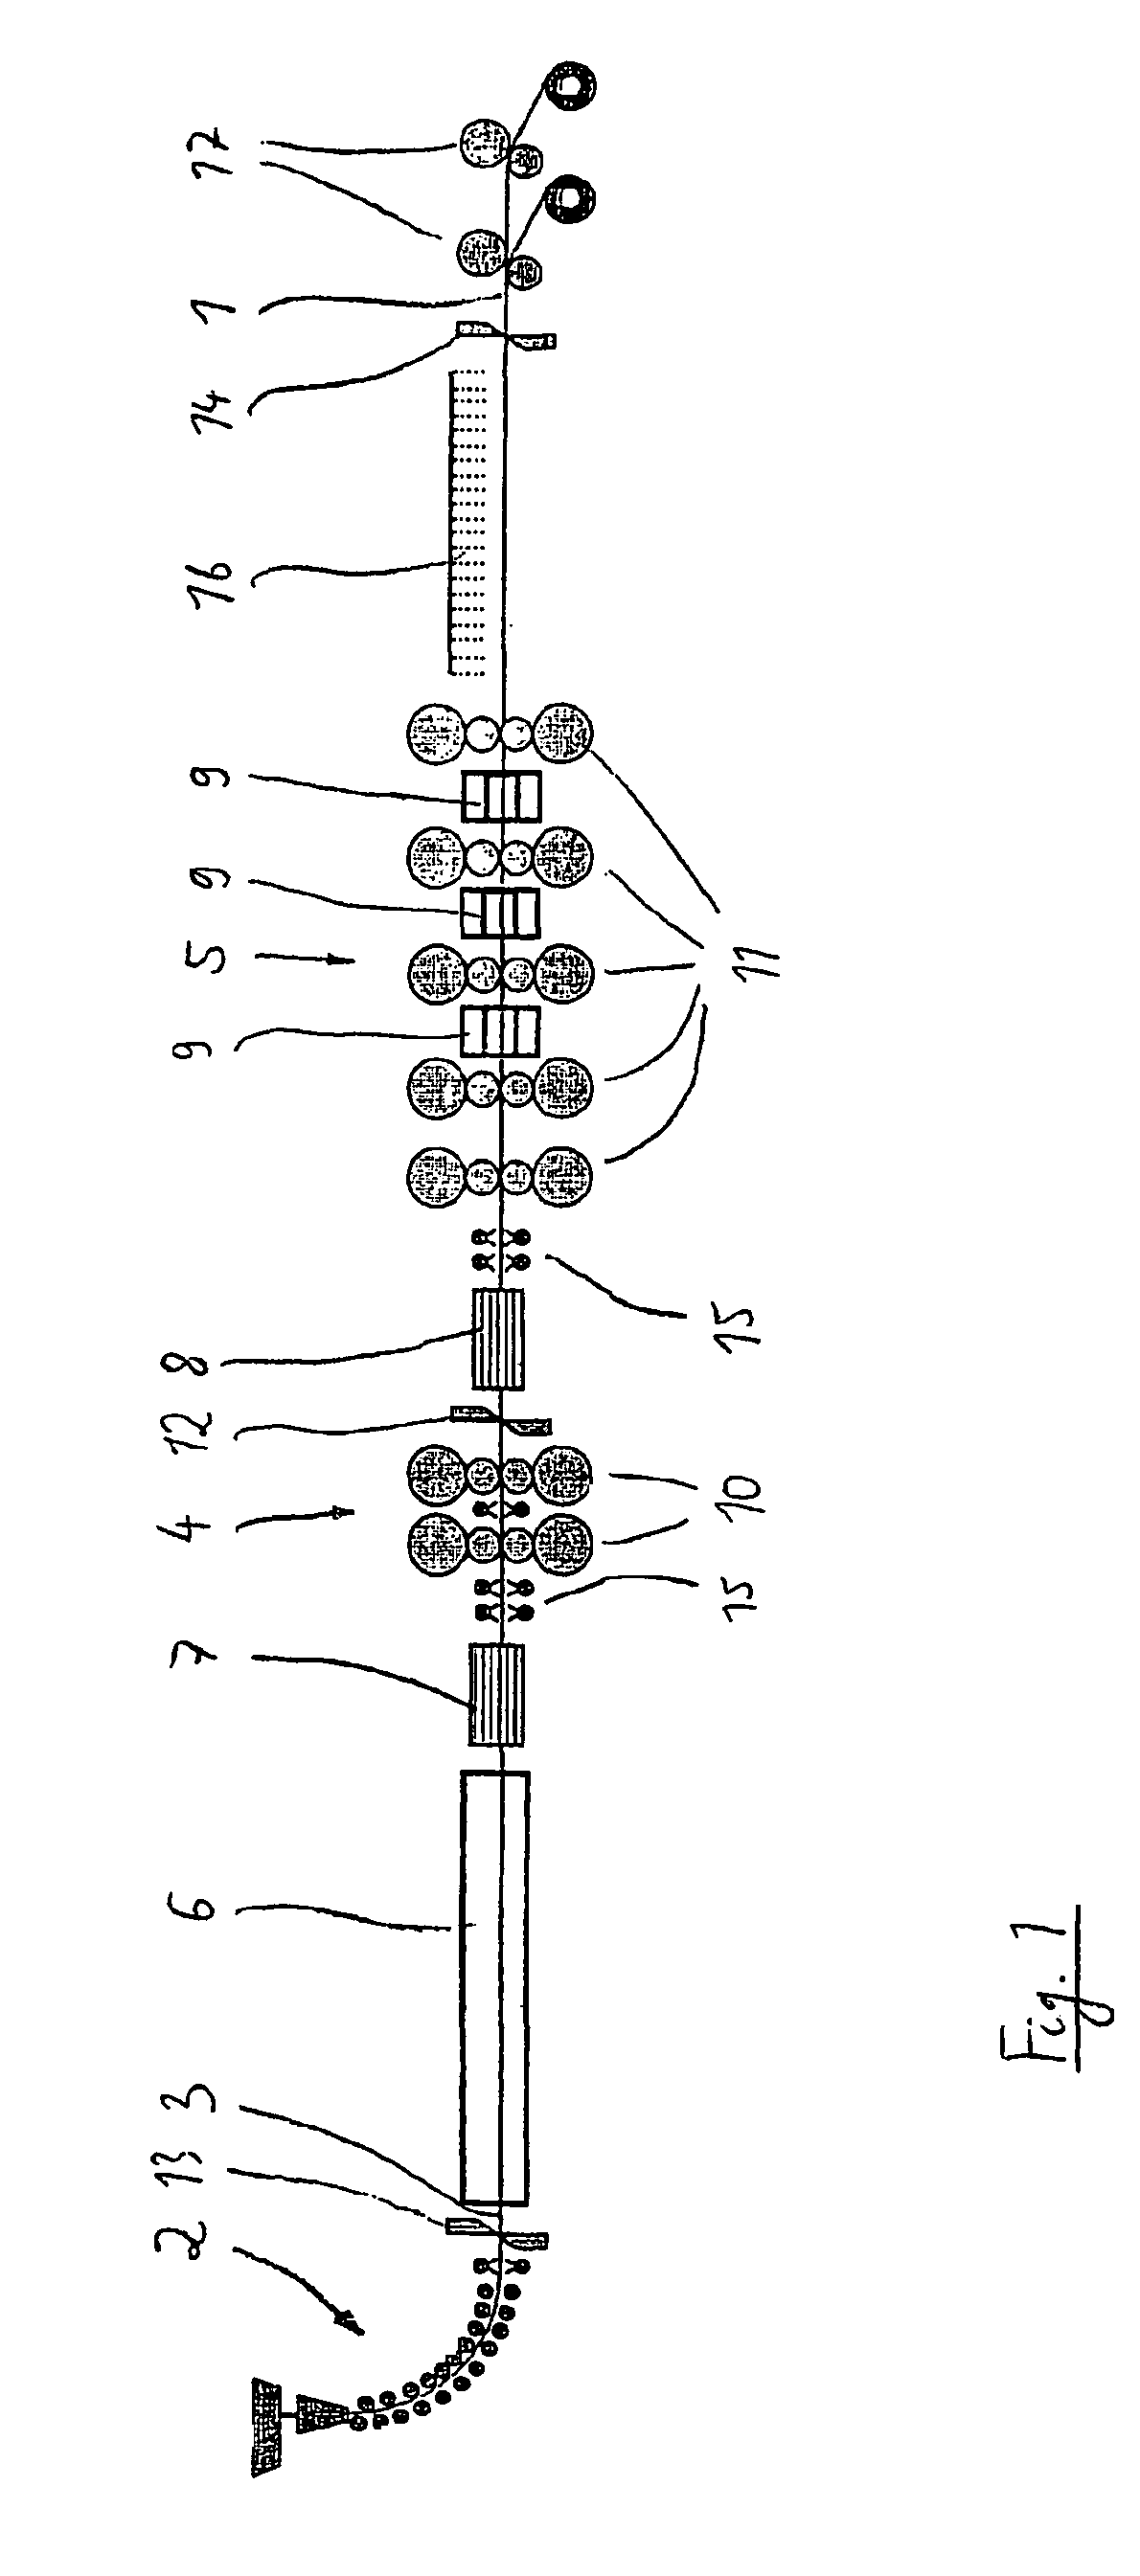 Method and device for producing a metal strip by continuous casting and rolling